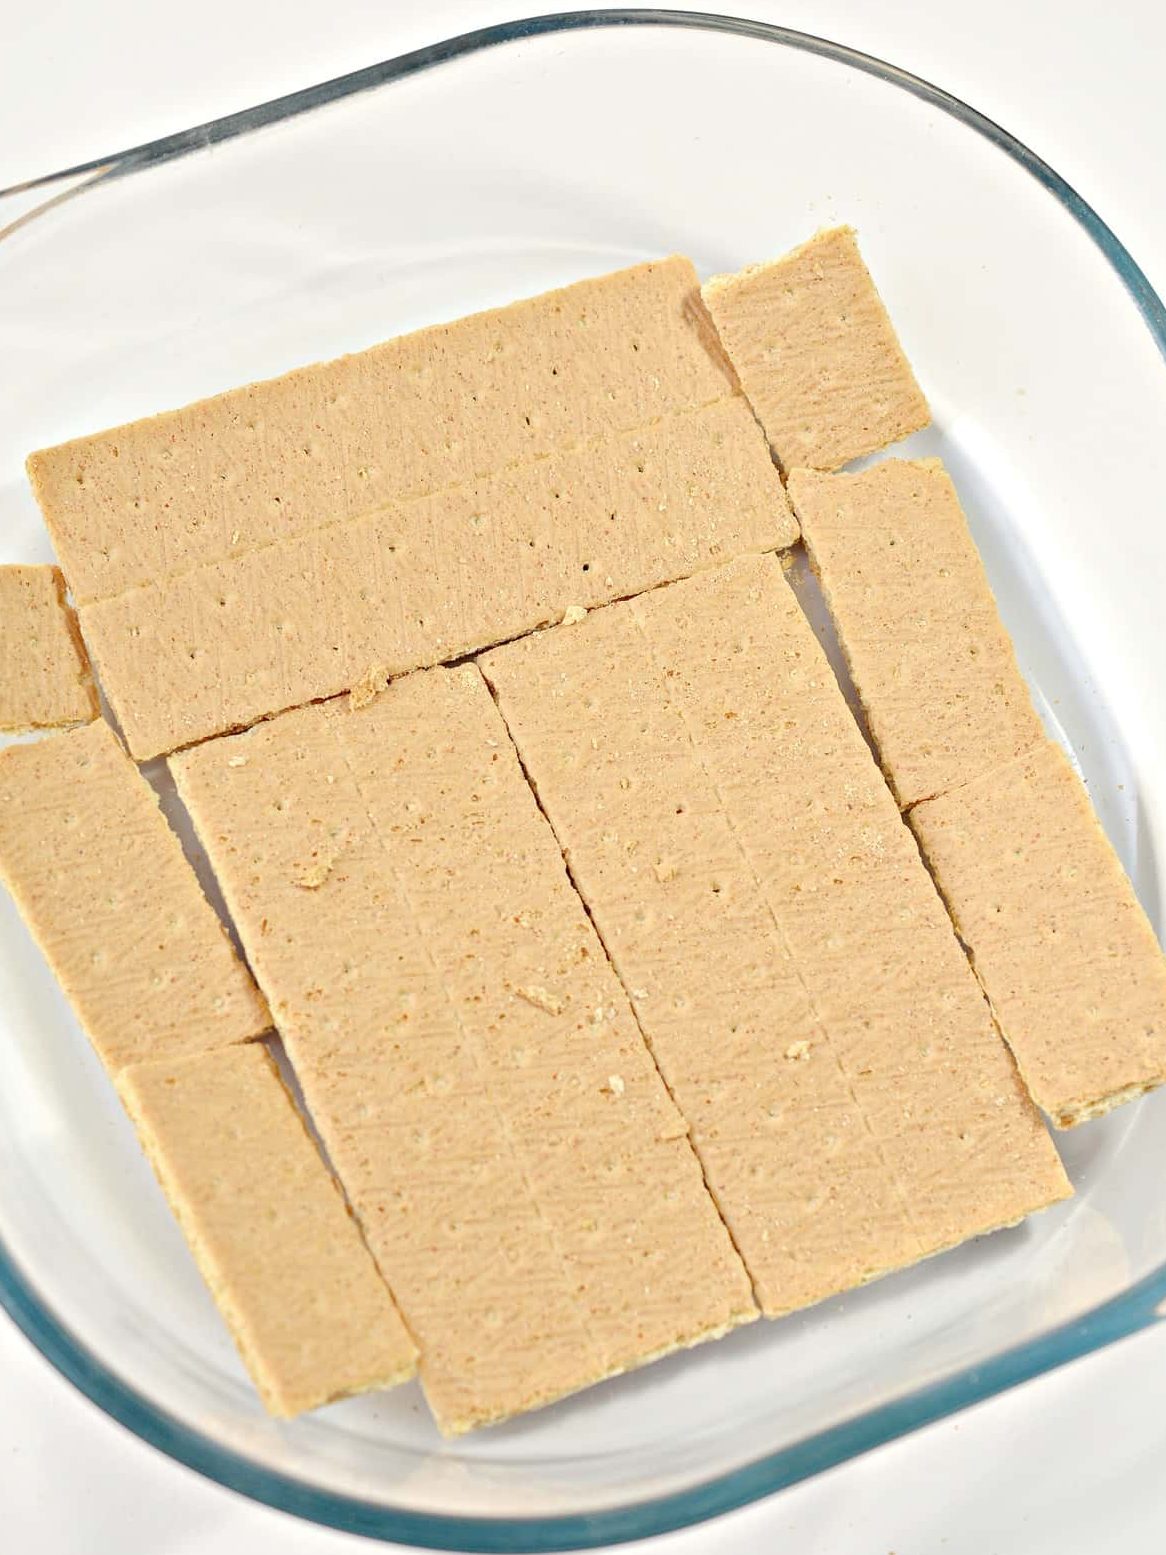 Place a layer of graham crackers in the bottom of a 9x9 baking dish. You can break the graham crackers up as needed to line it completely.